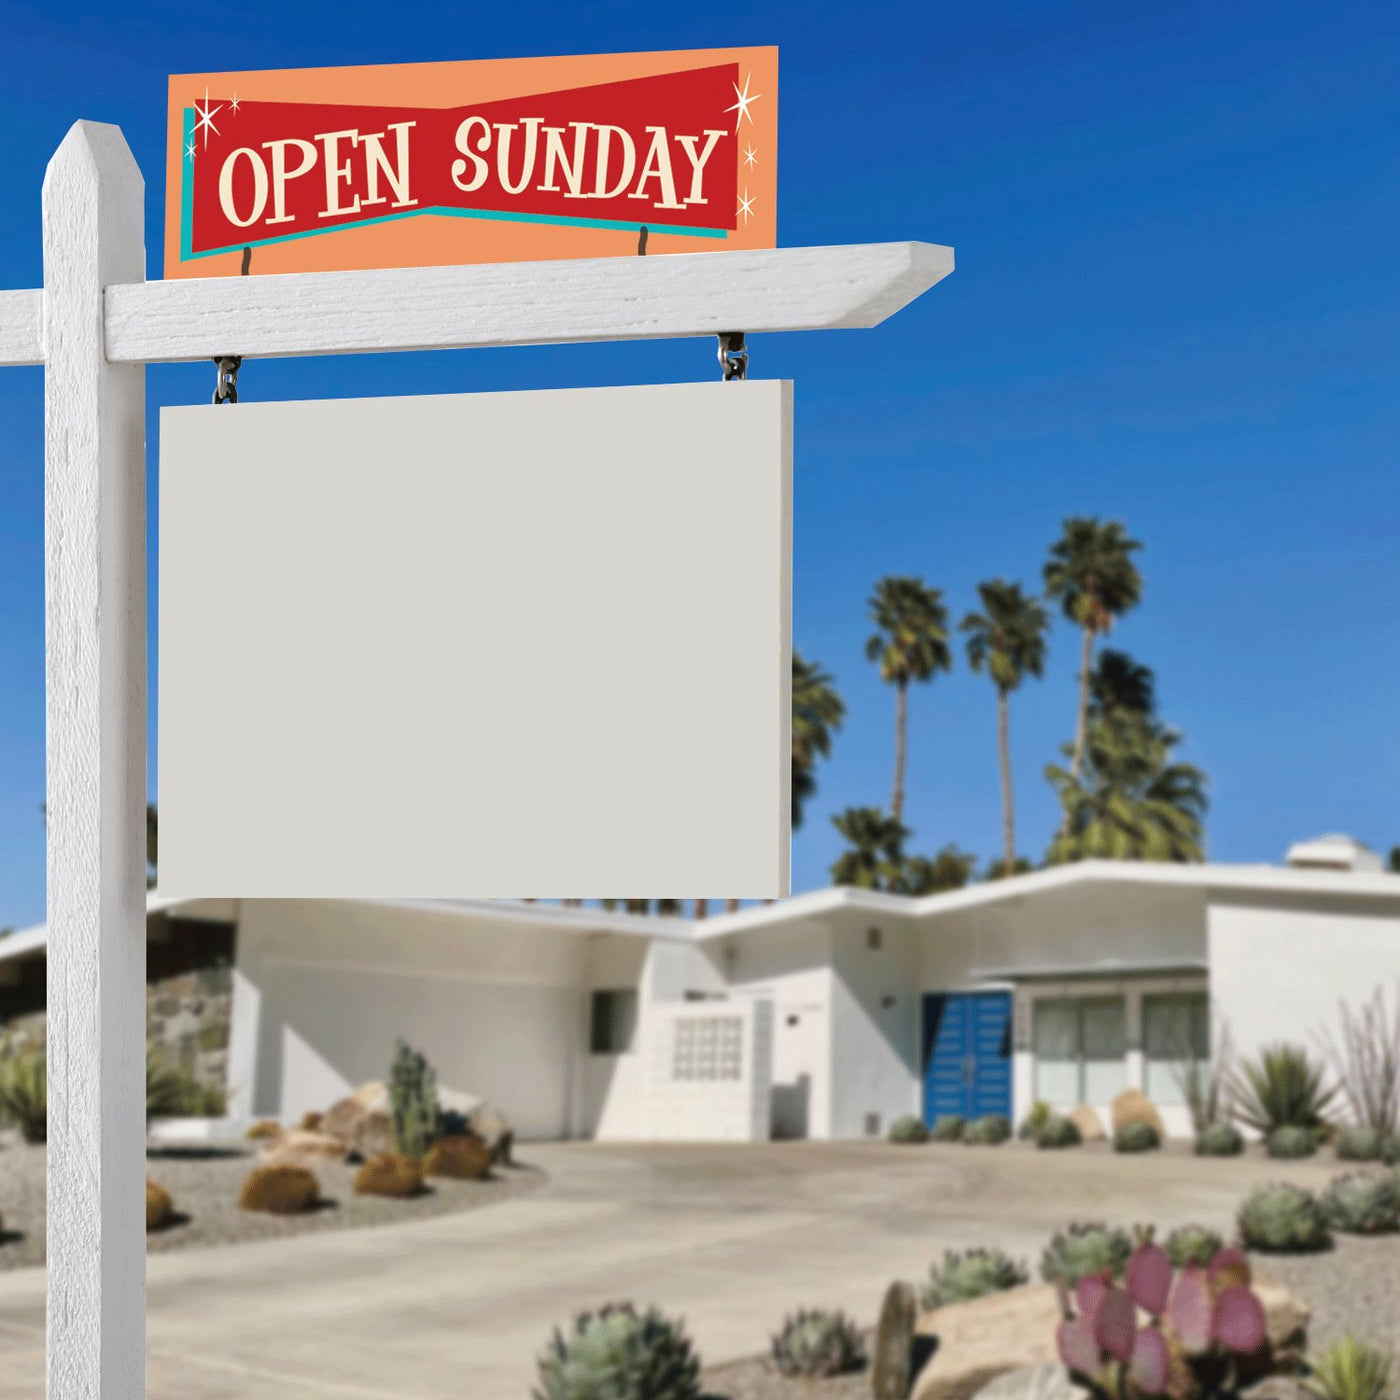 Open Sunday - Mid Century - All Things Real Estate